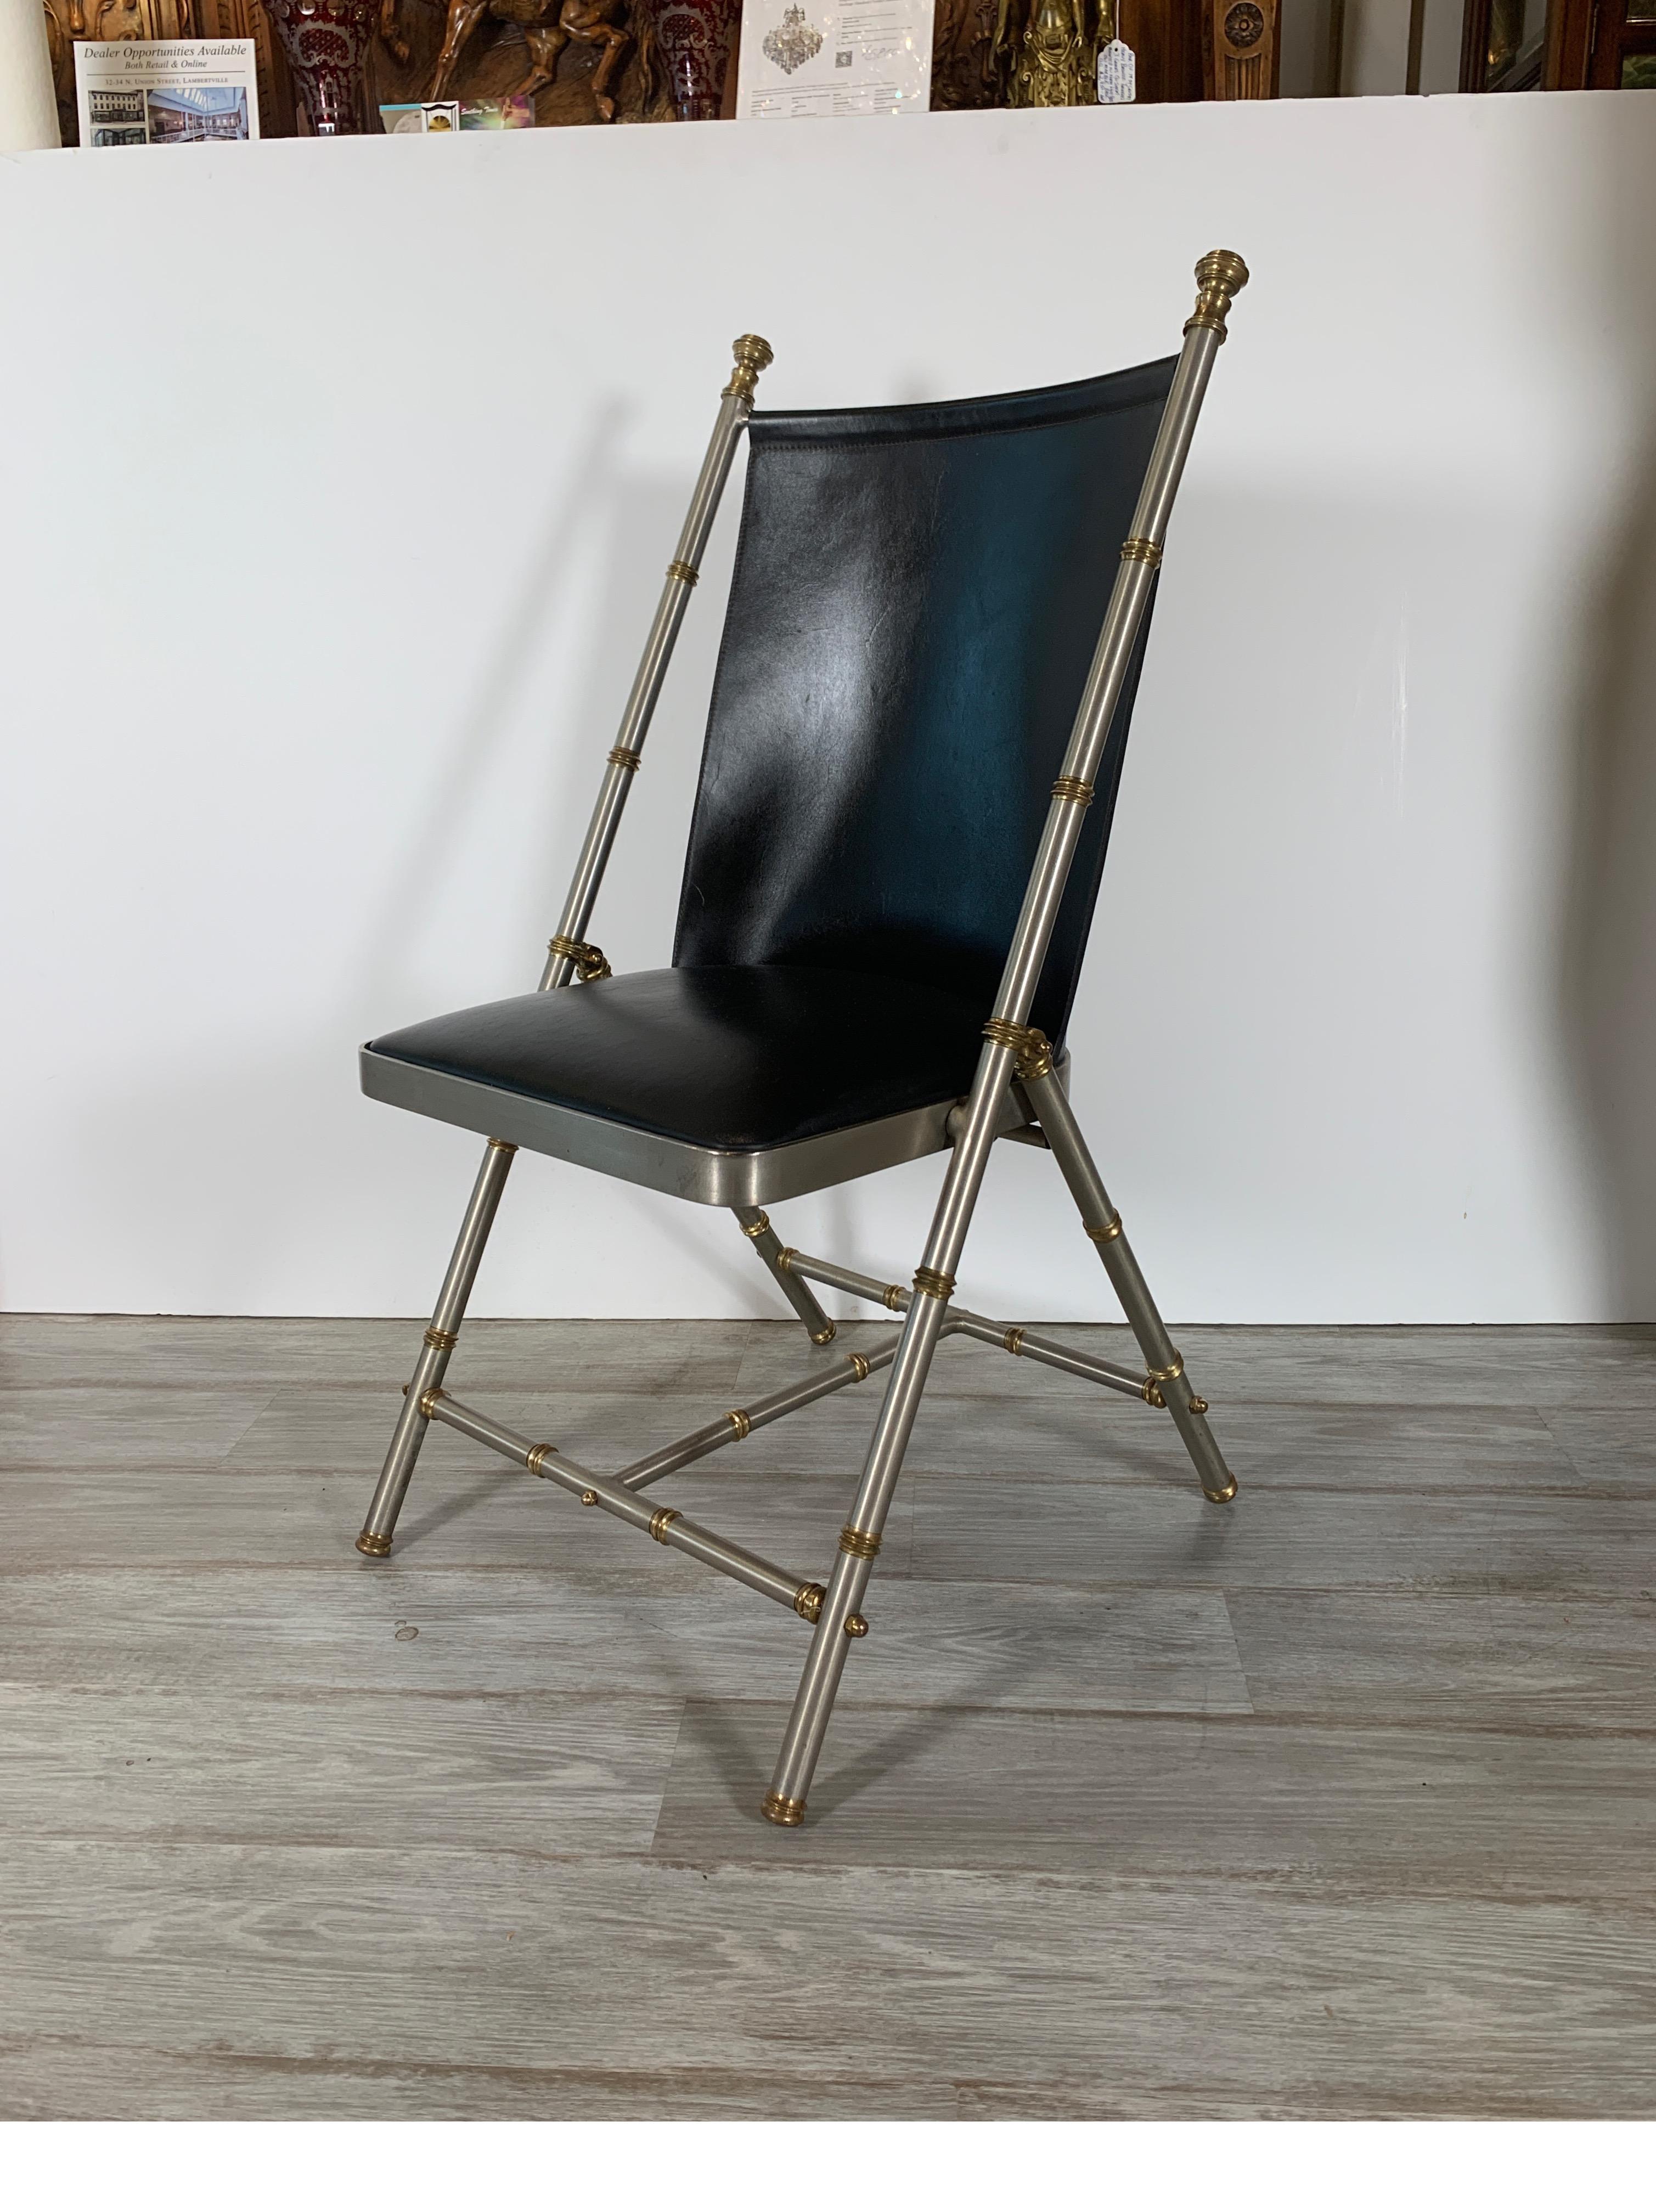 The faux bamboo motif frame with sturdy leather seat and back. Great early Campaign style with modern vibe. Great quality.